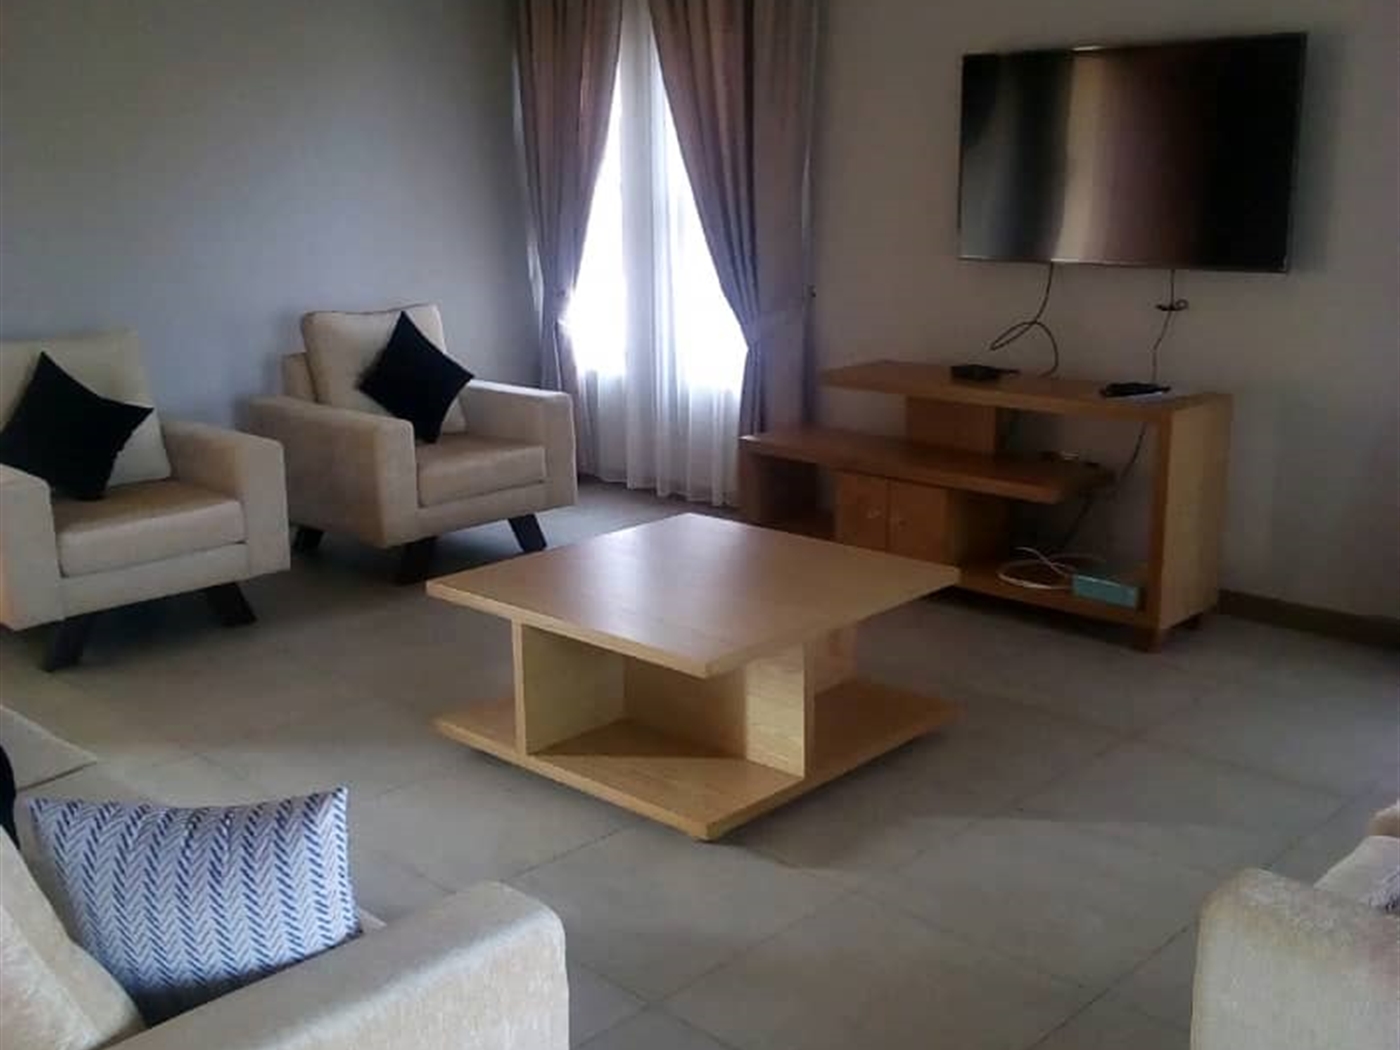 Penthouse for rent in Lugogo Kampala